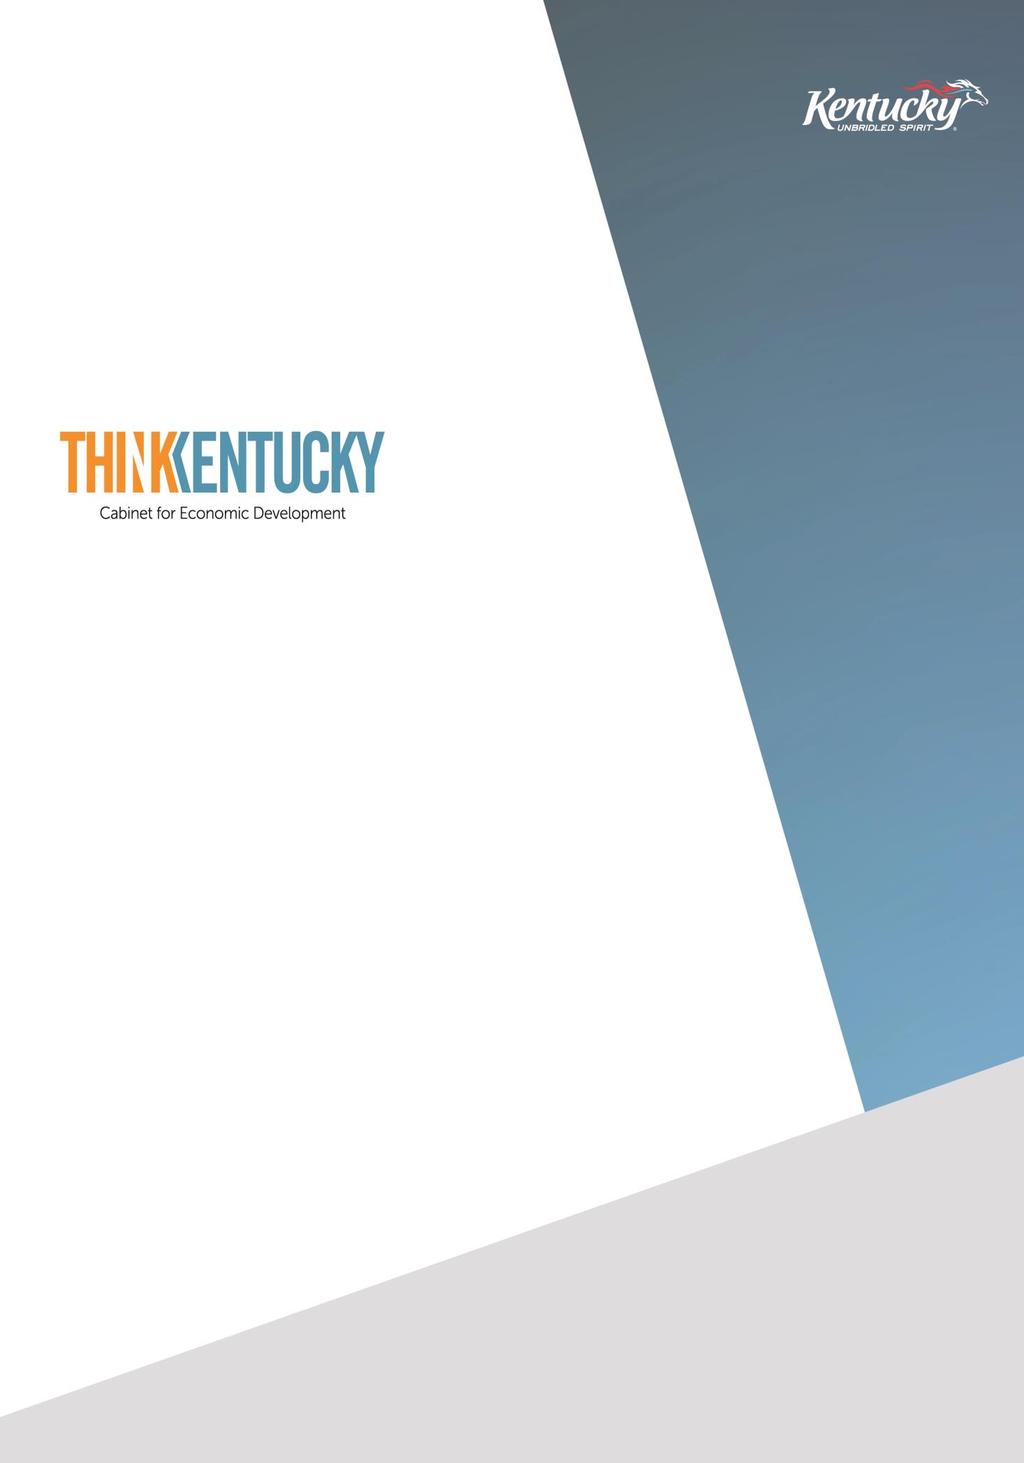 2017 KENTUCKY DIRECTORY OF MANUFACTURERS REPORT DATE: November 9, 2017 NUMBER OF FACILITIES: 2,442 TOTAL